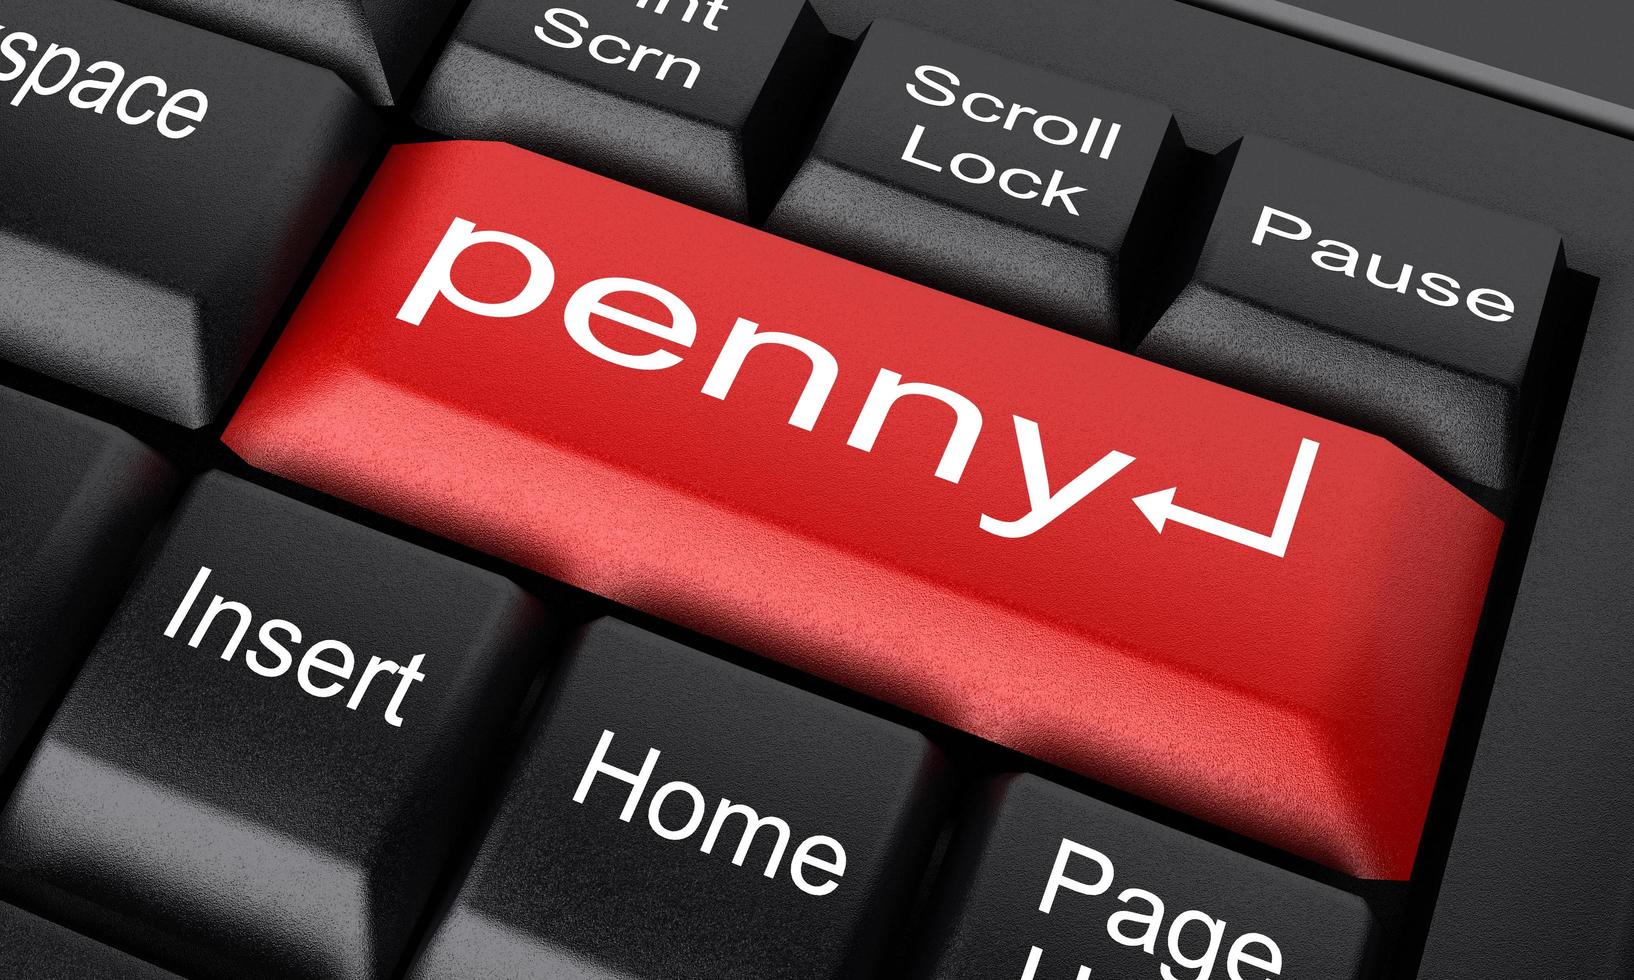 penny word on red keyboard button photo